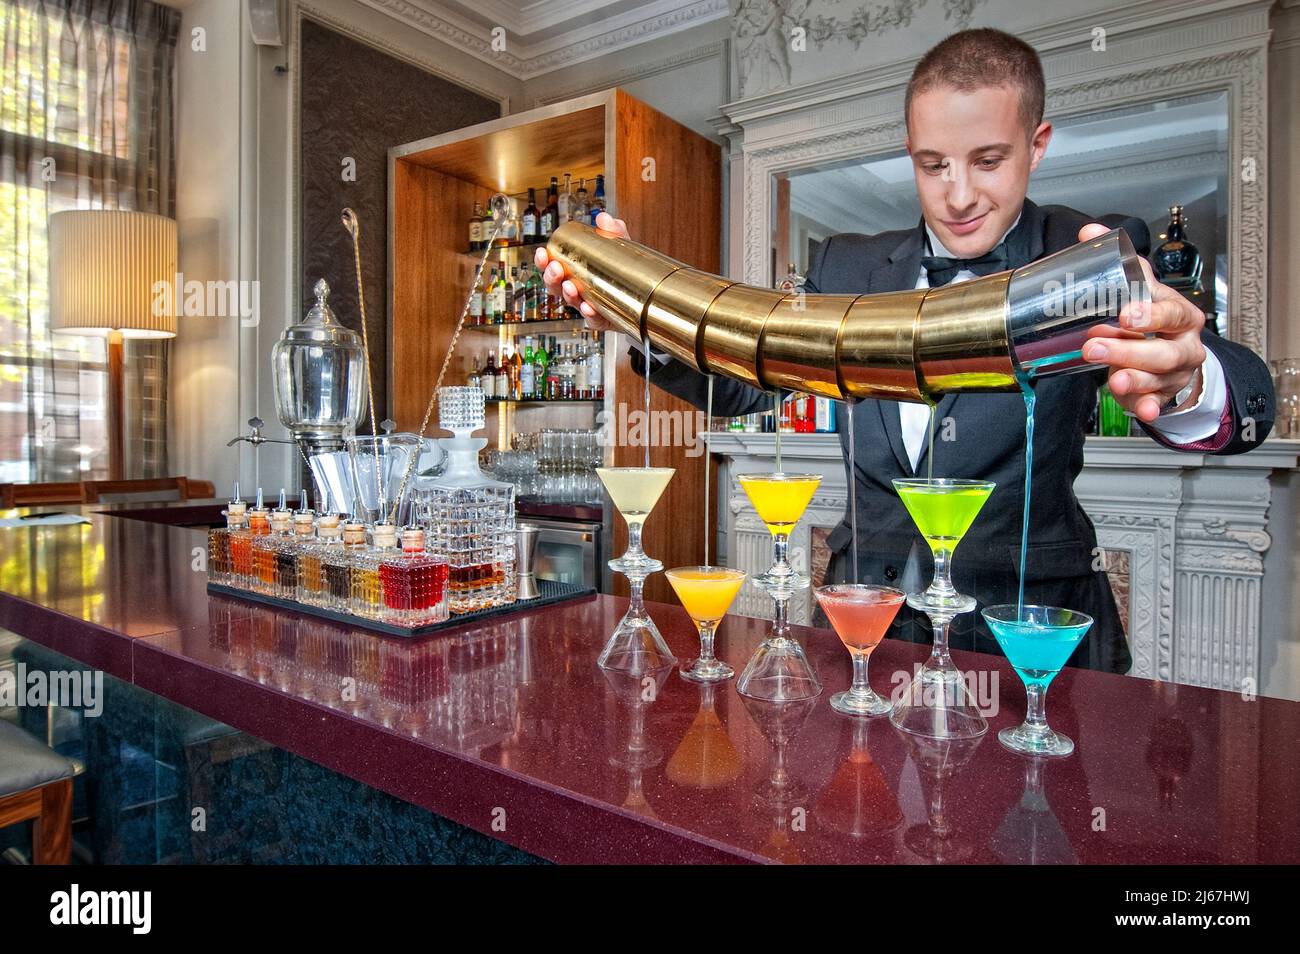 Bartender pouring drinks at a bar counter of a luxury hotel Stock Photo